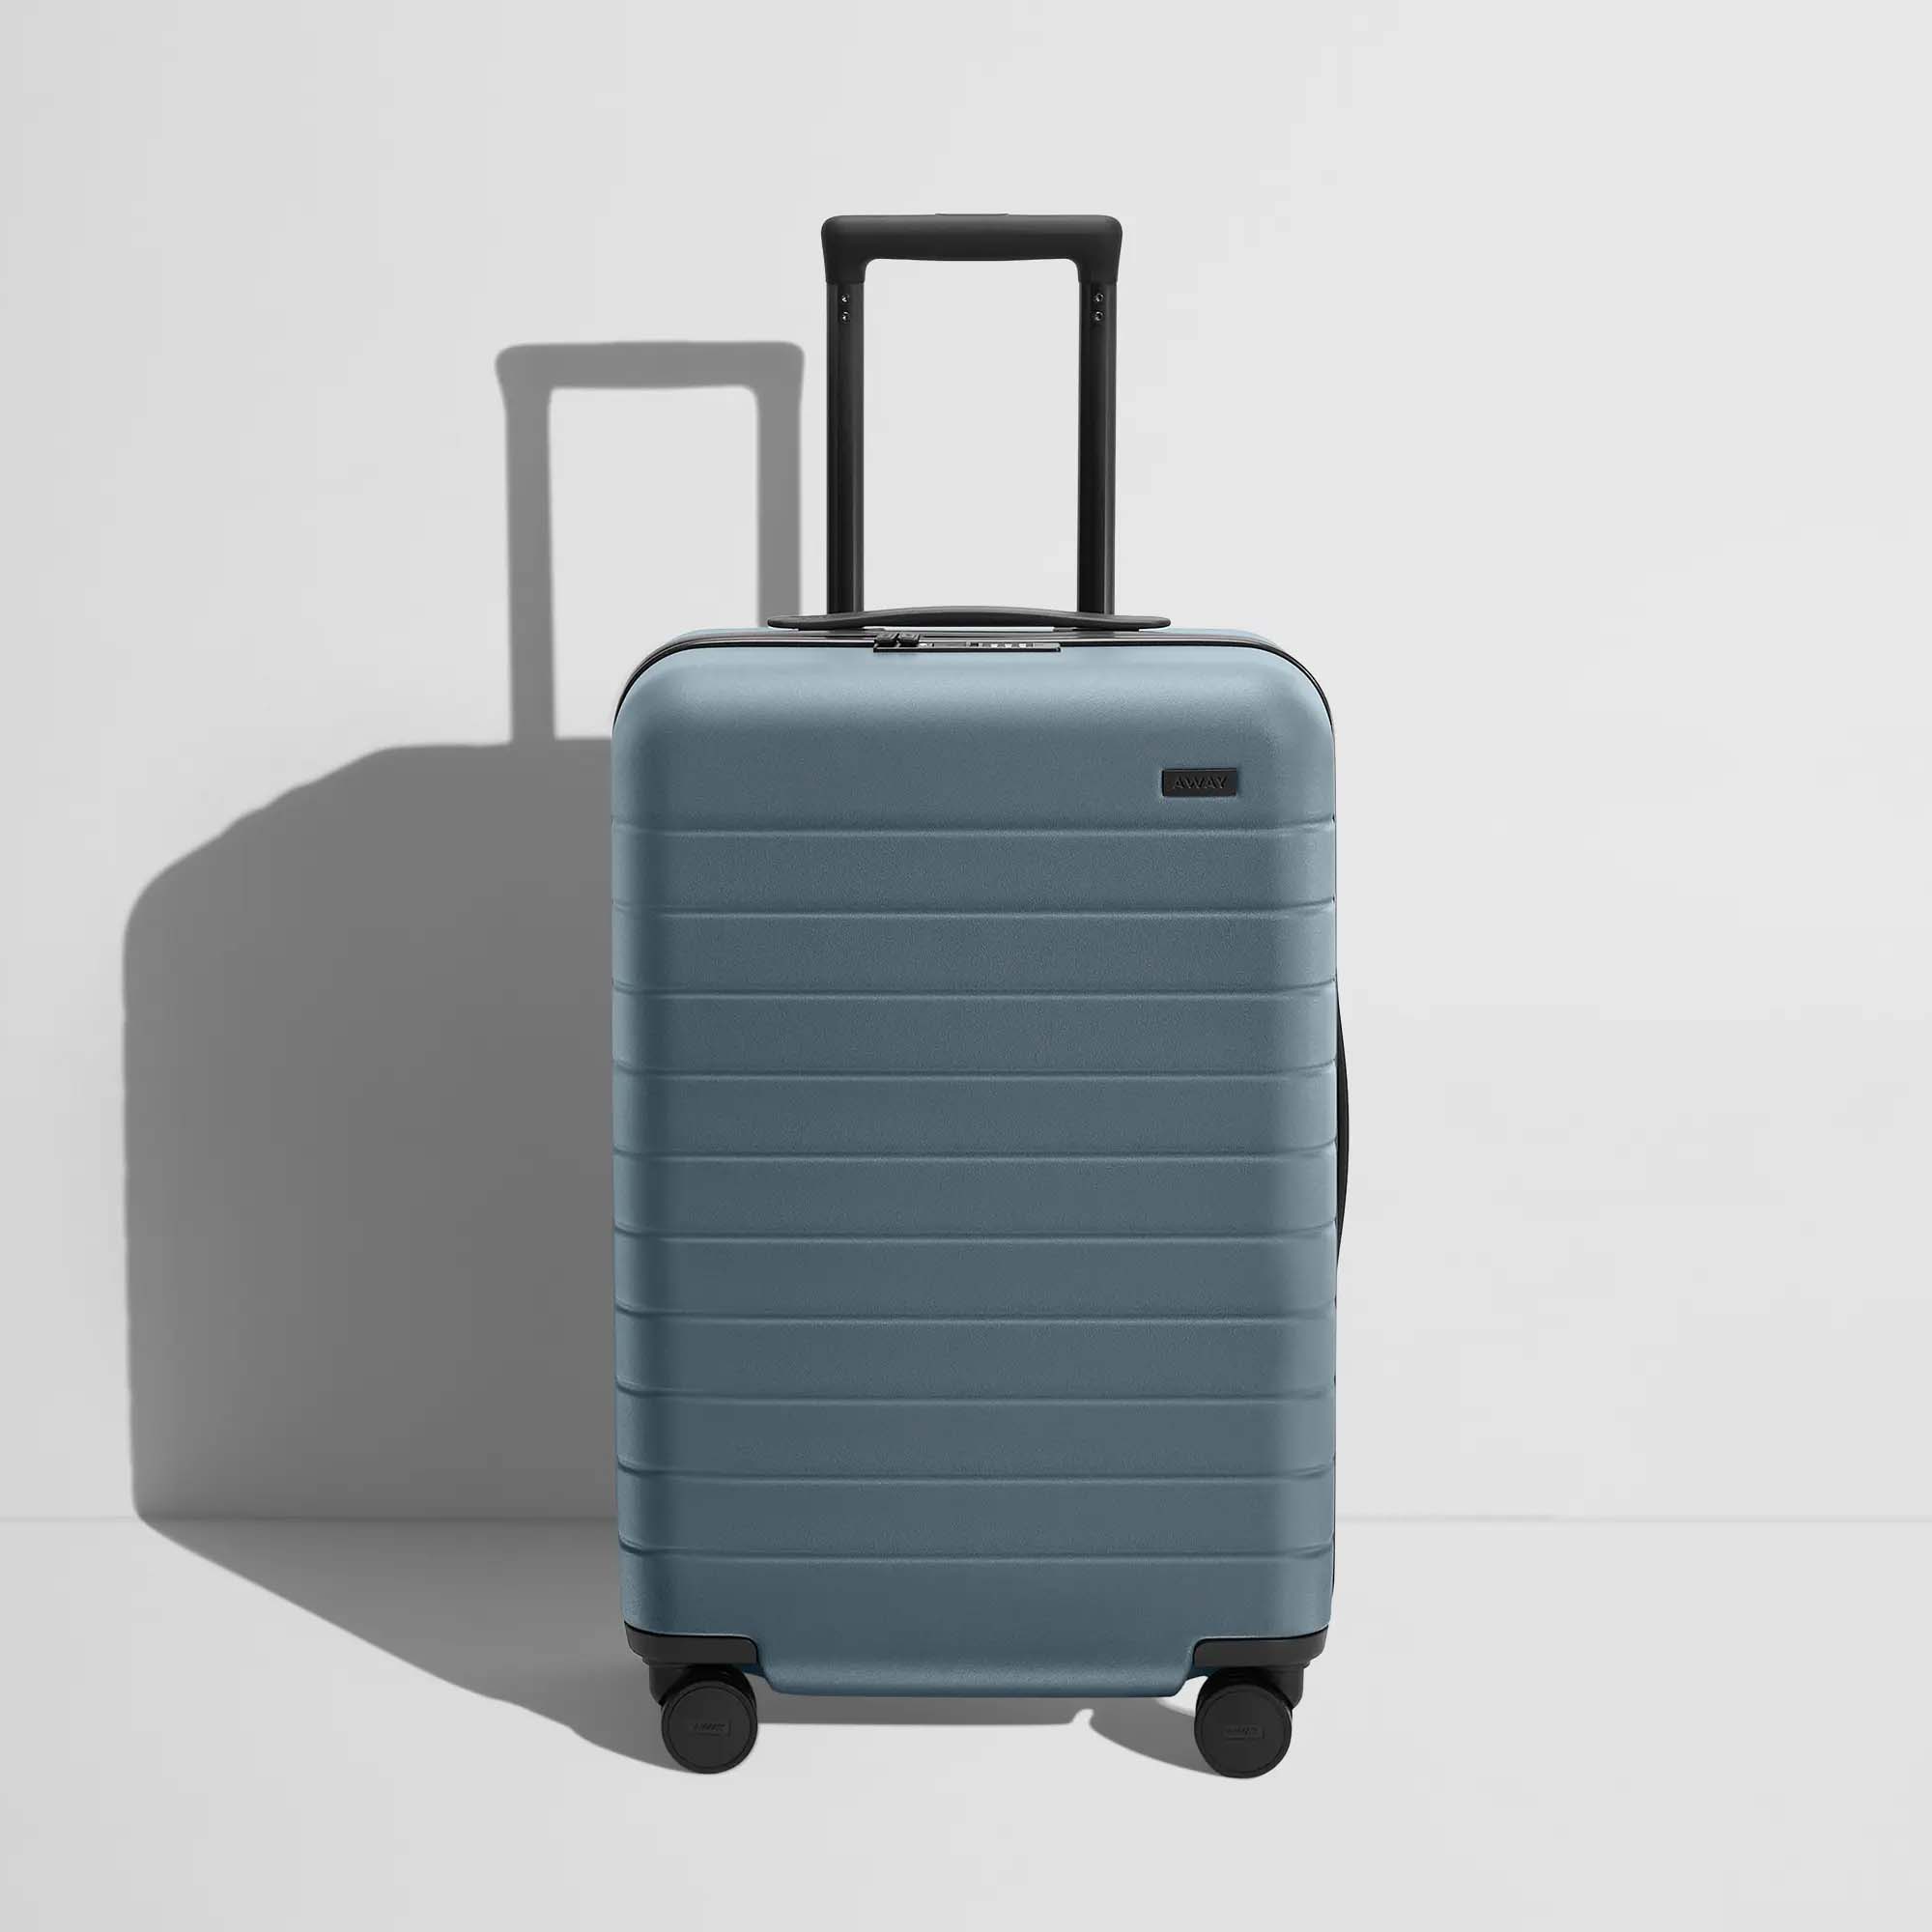 The Bigger Carry-On Flex suitcase in coast blue